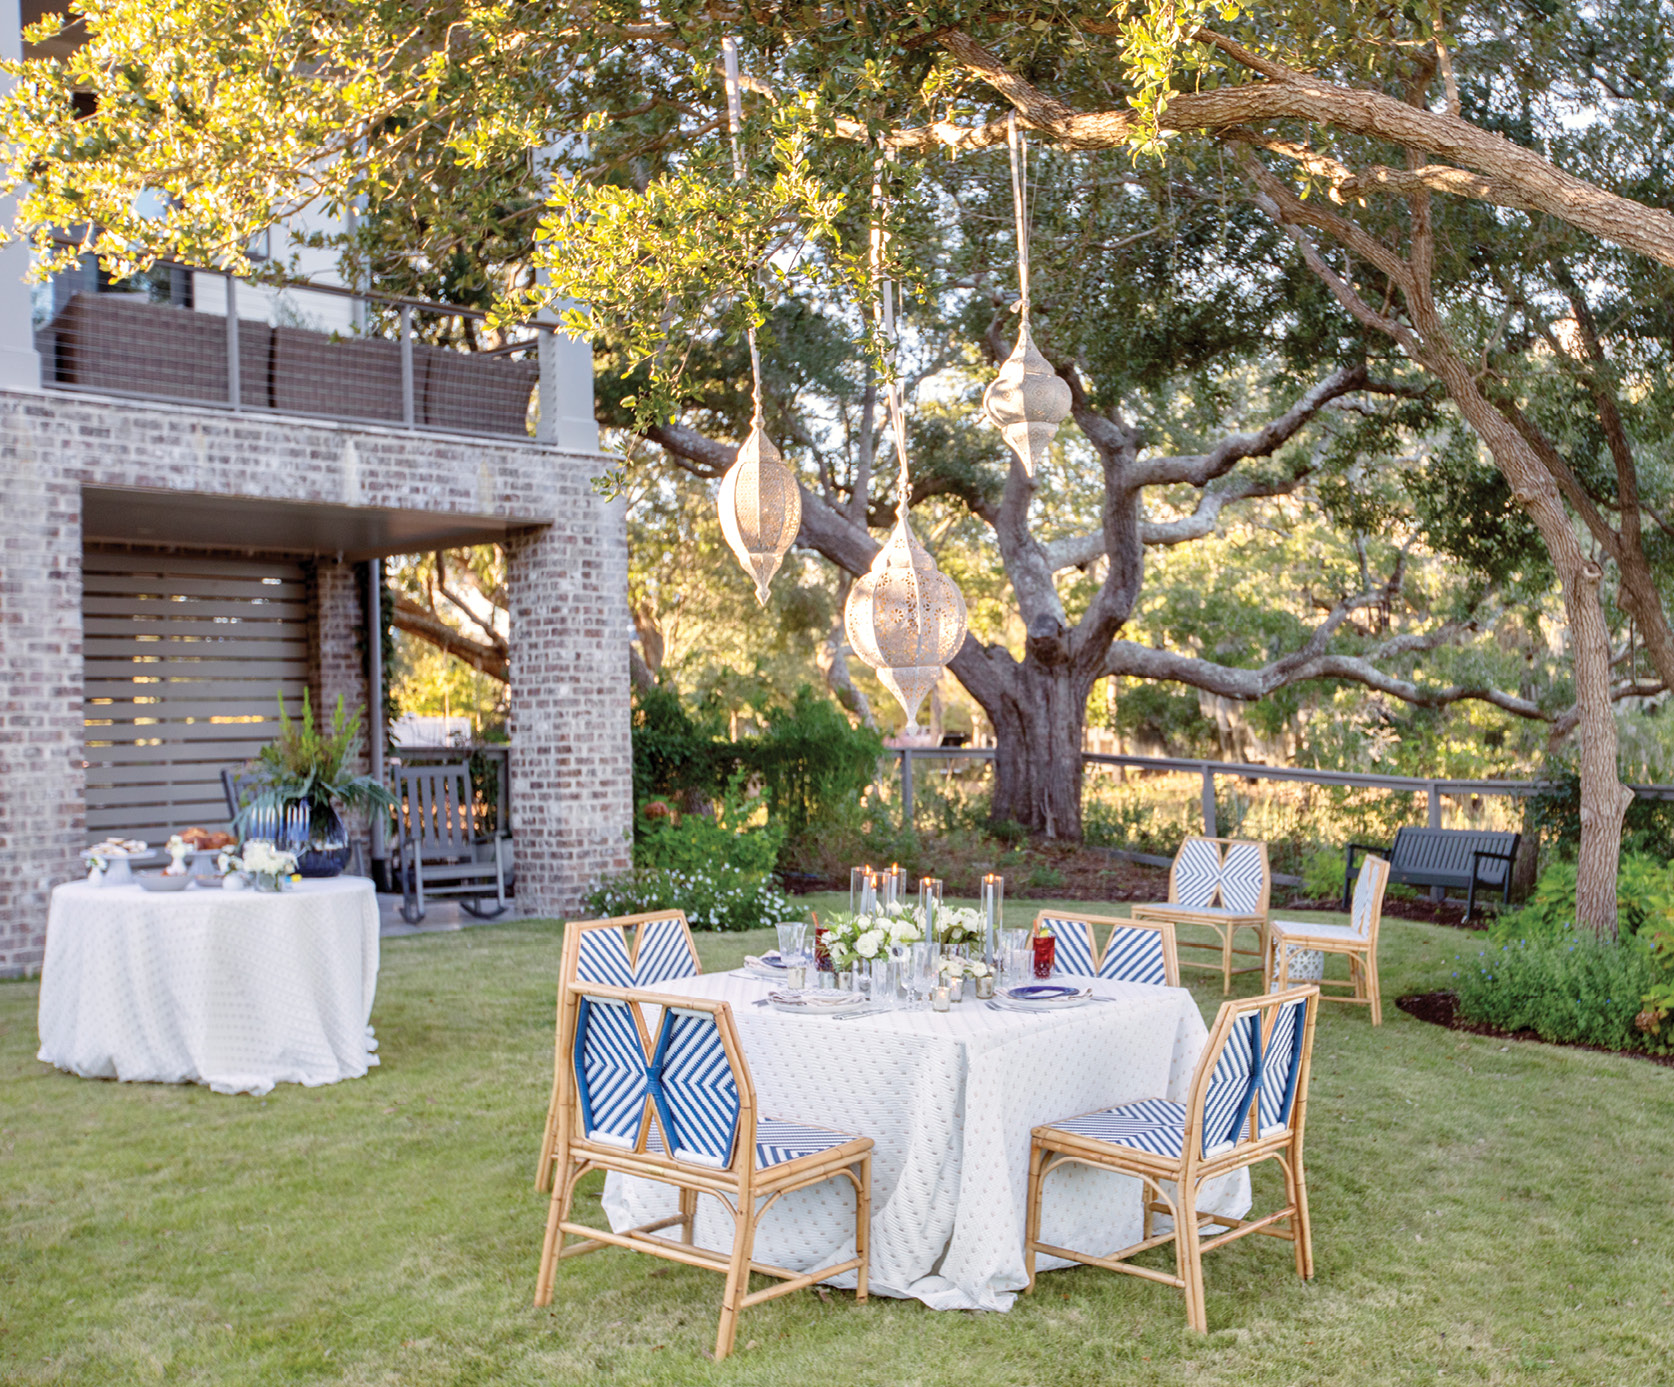 Robinson hung the family’s outdoor lanterns over the adults’ dining table, candlelit and shimmering with mercury glass